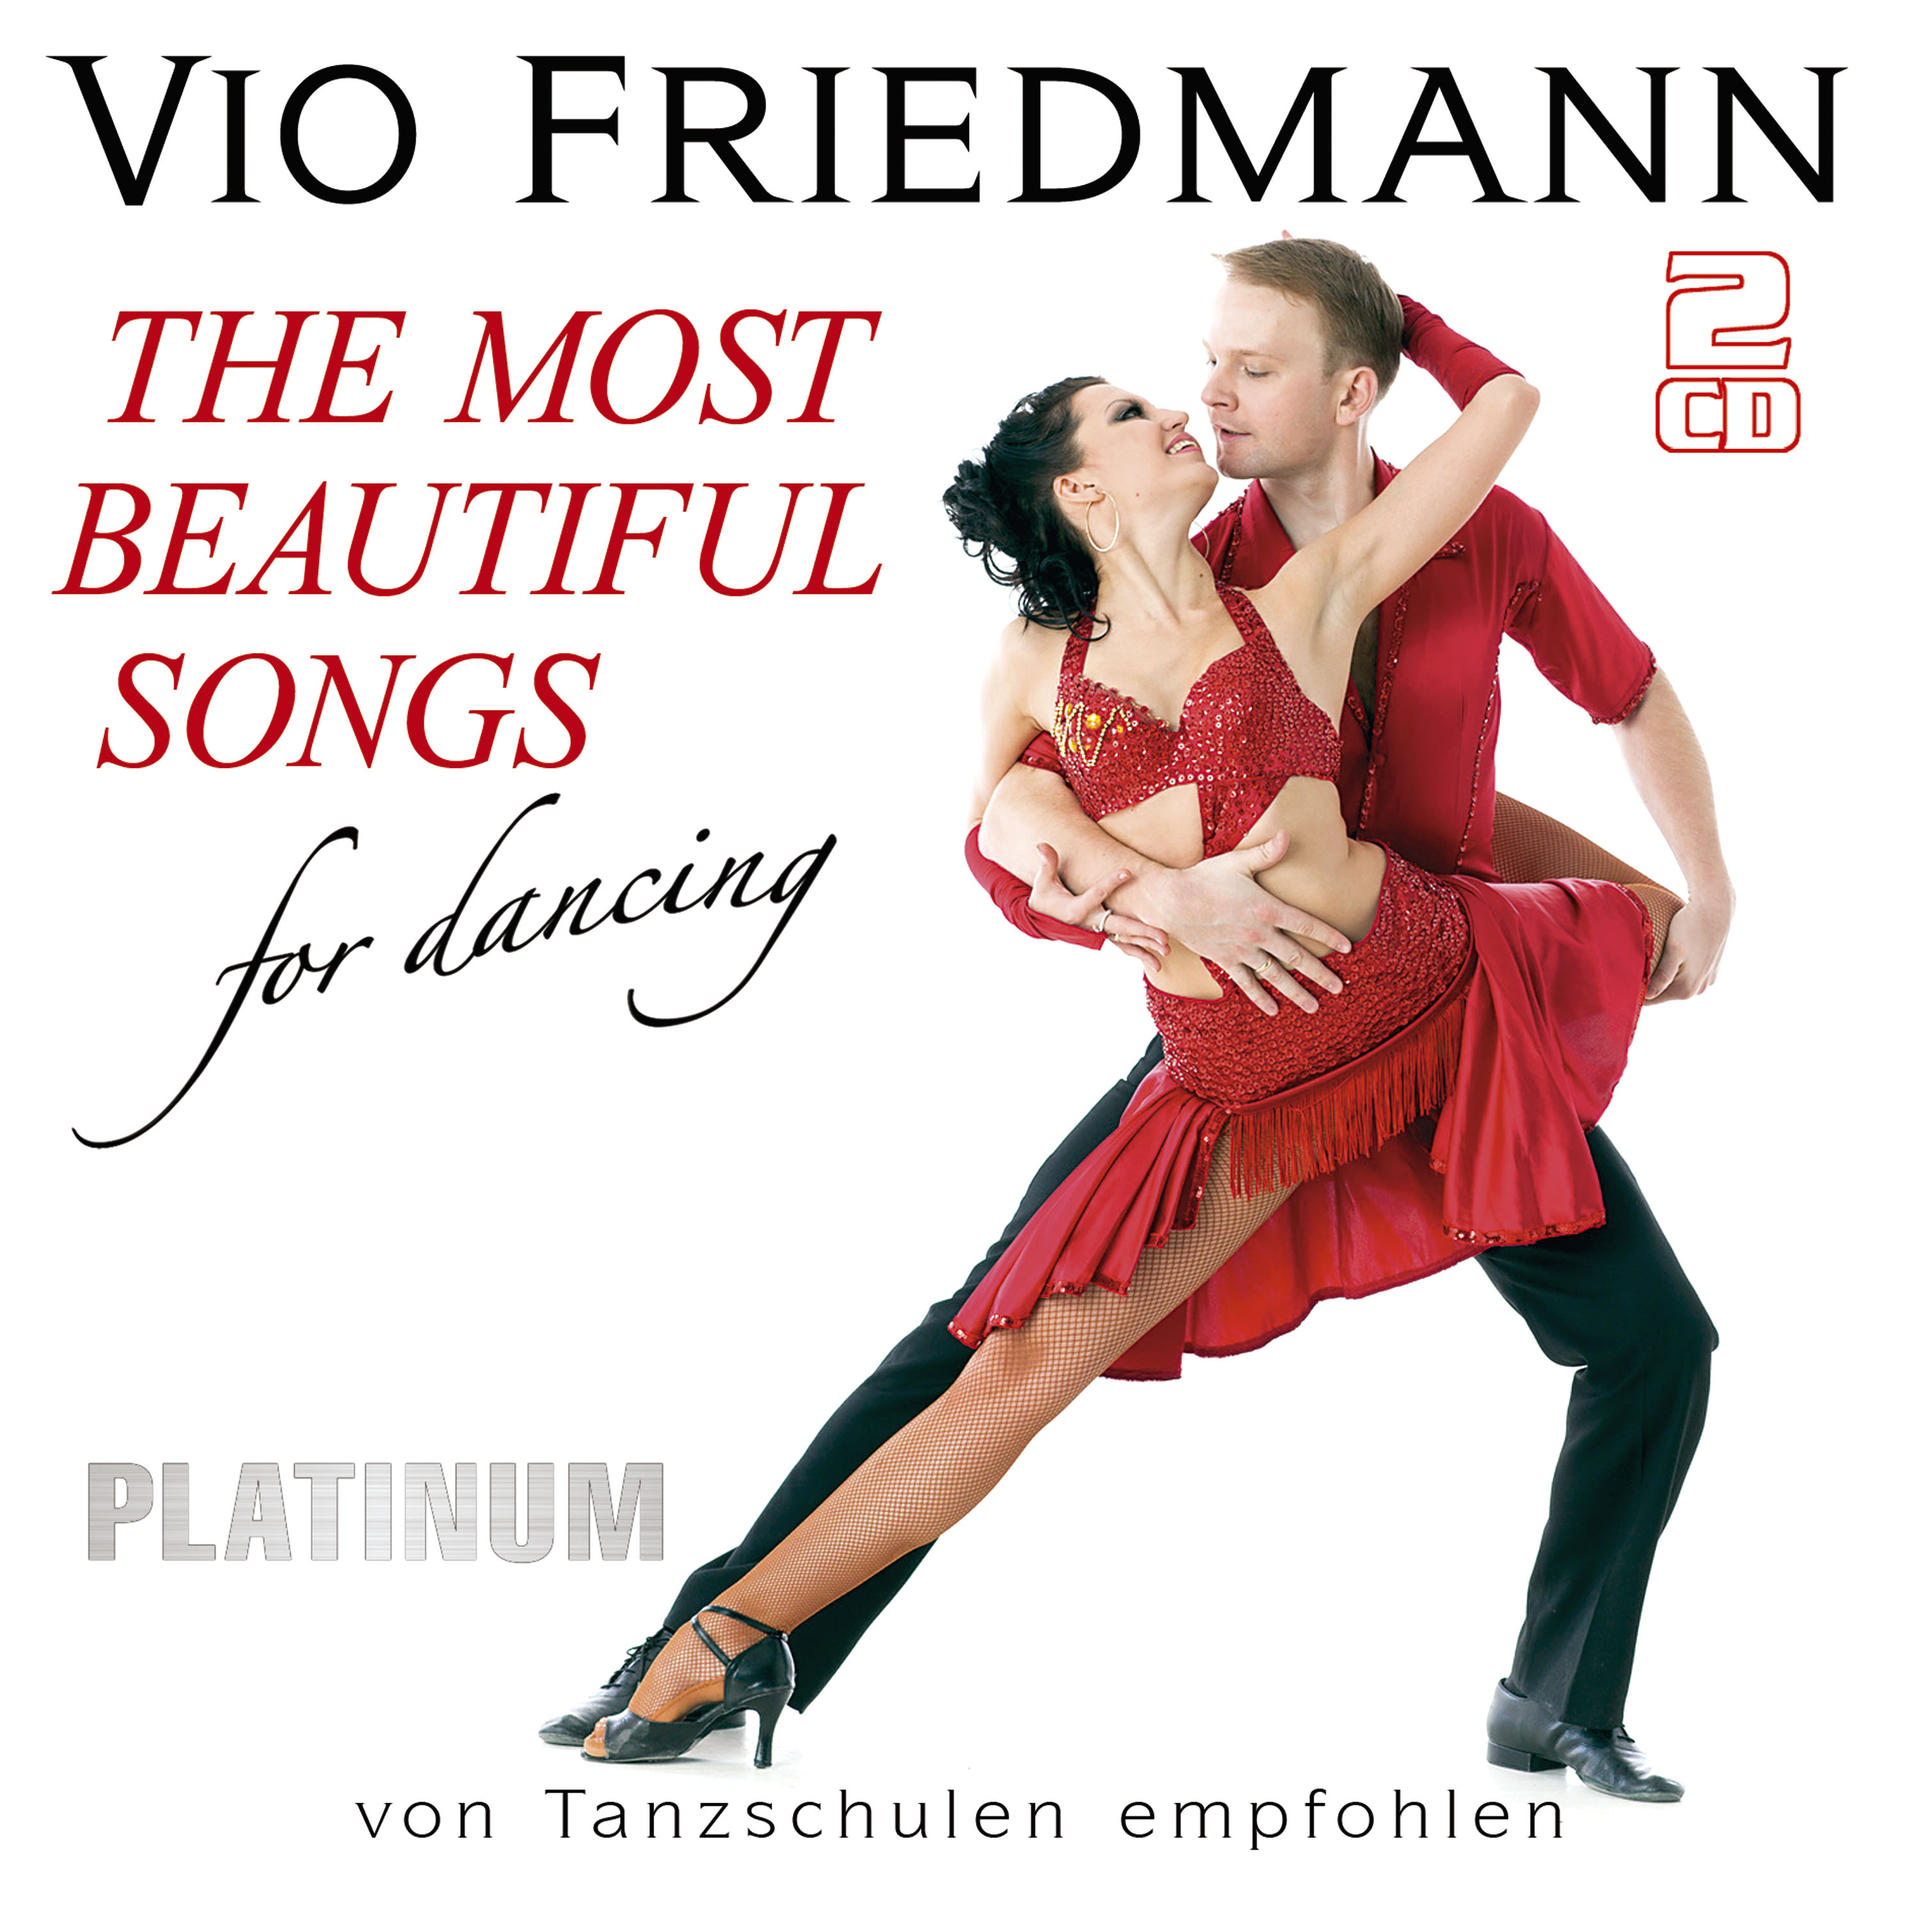 (CD) Friedmann Vio Songs Most For - Beautiful - The Dancing-Platinum